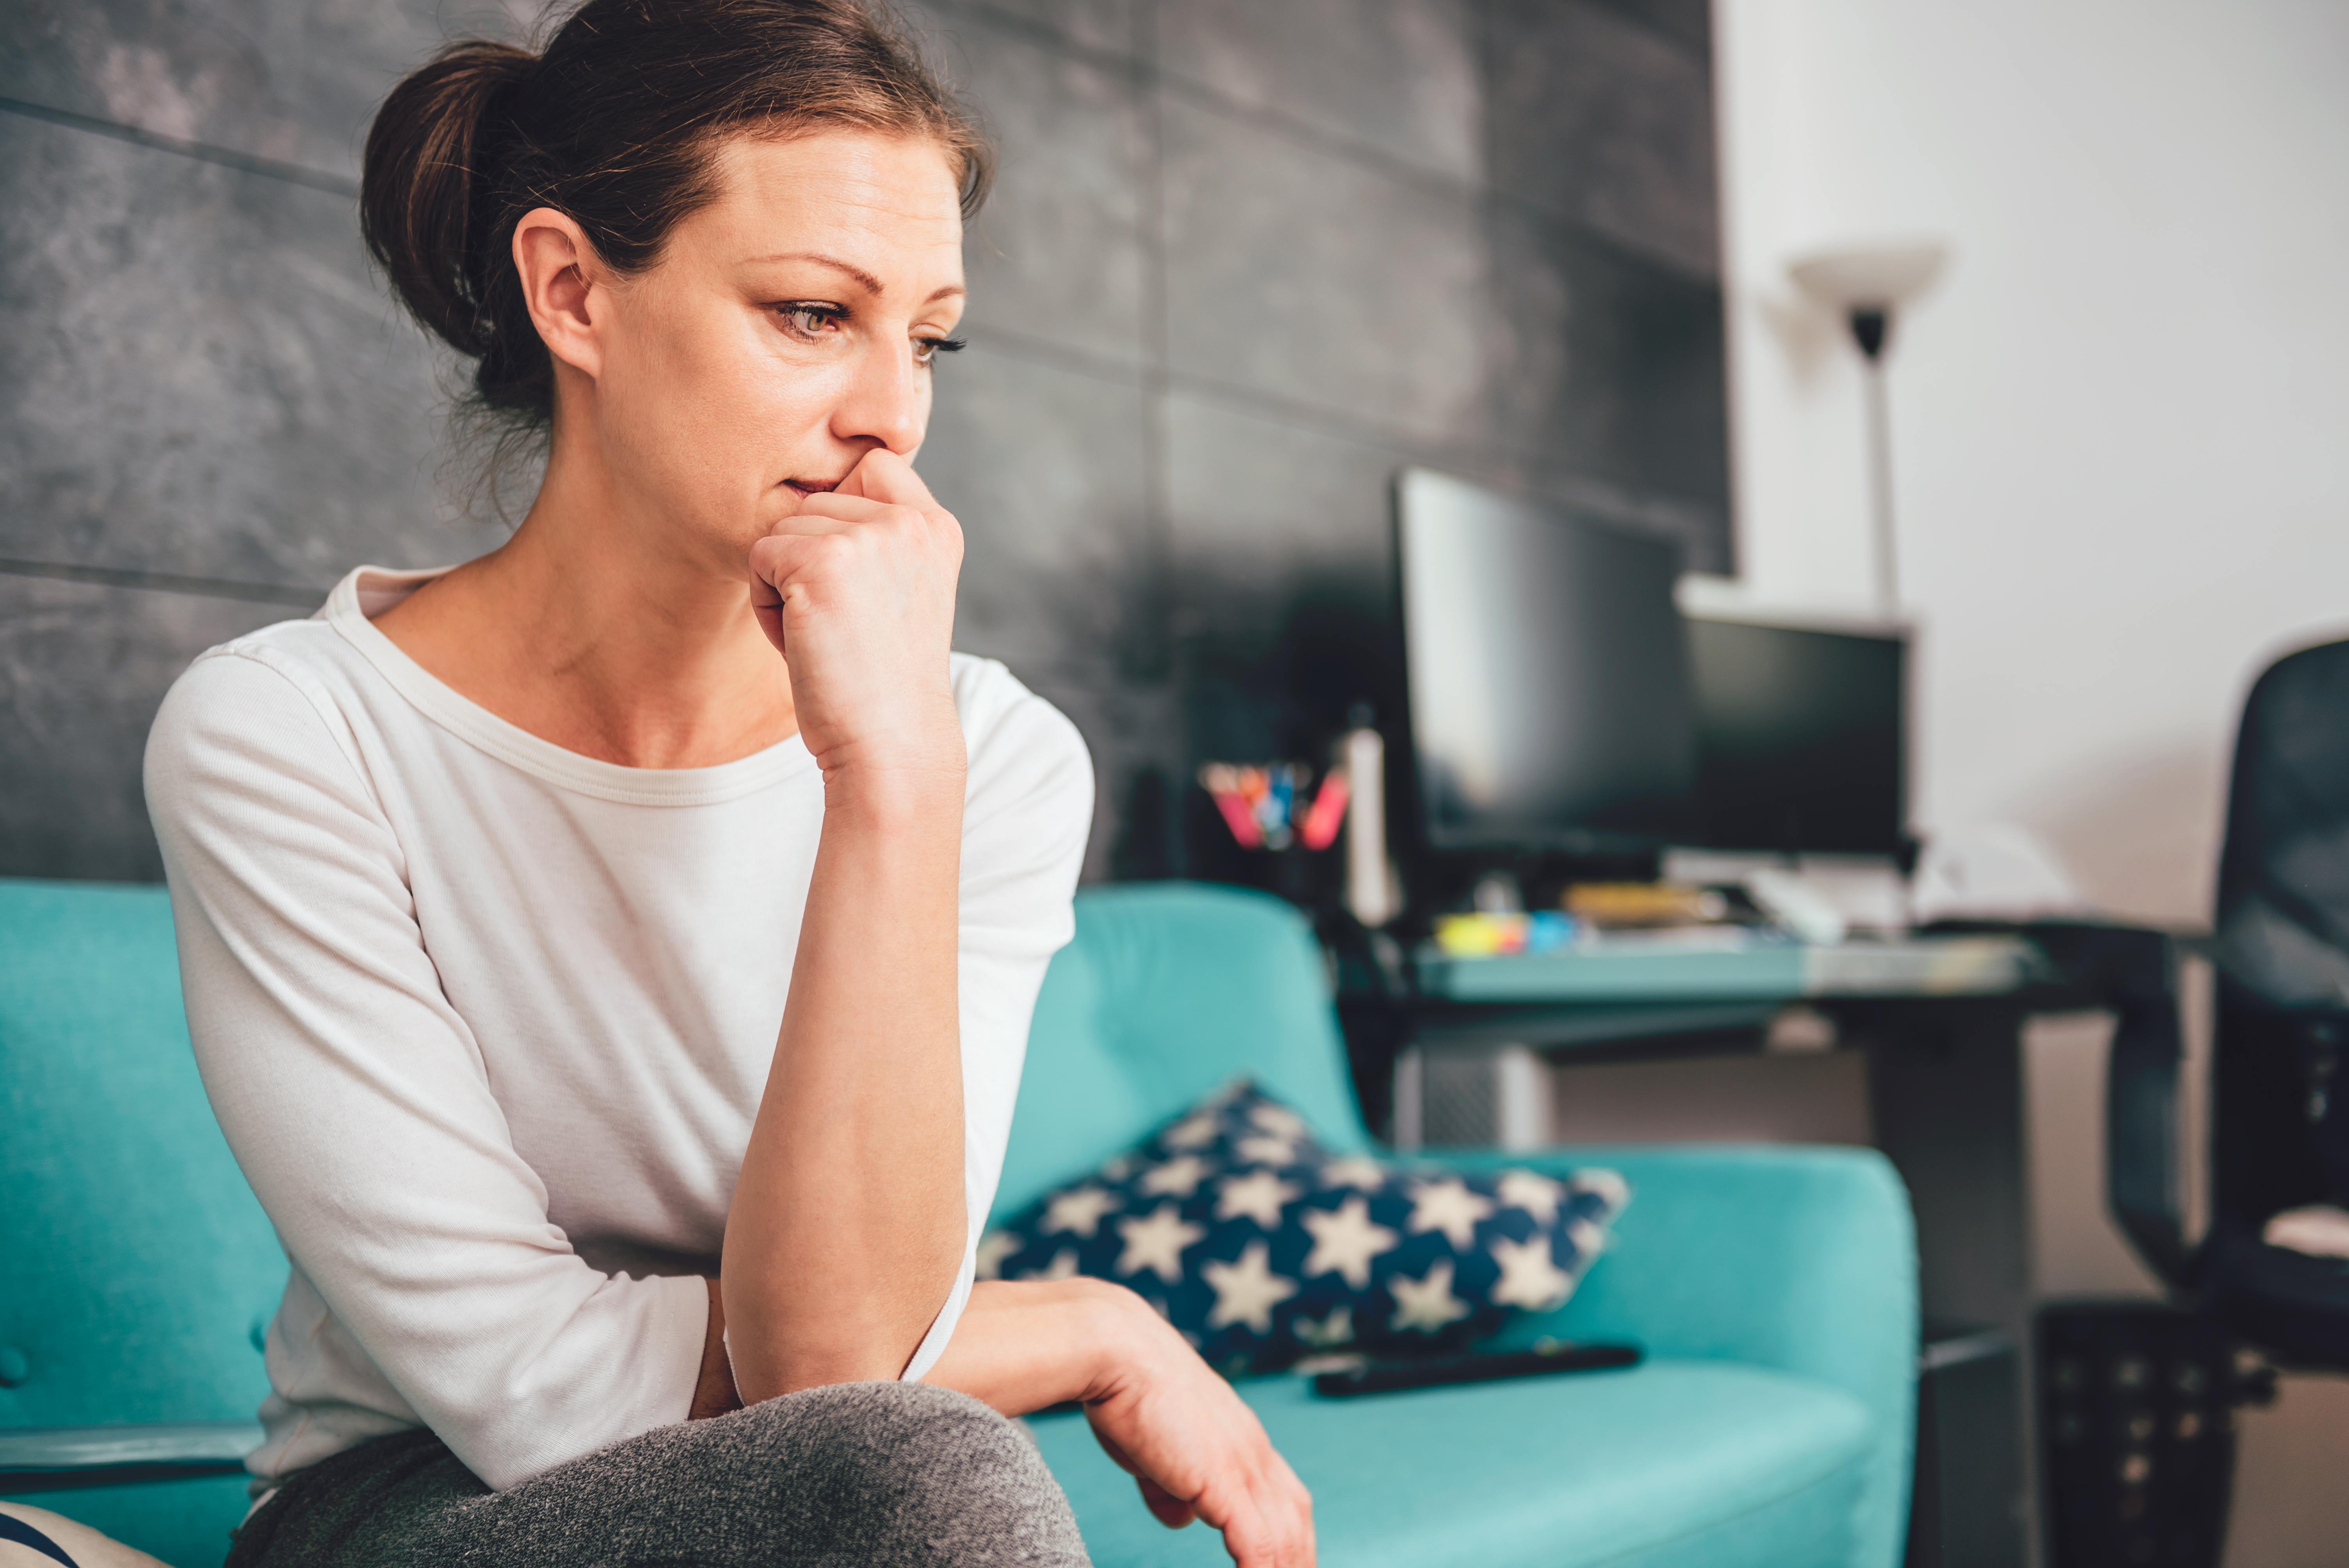 An upset woman sitting on a couch | Source: Shutterstock